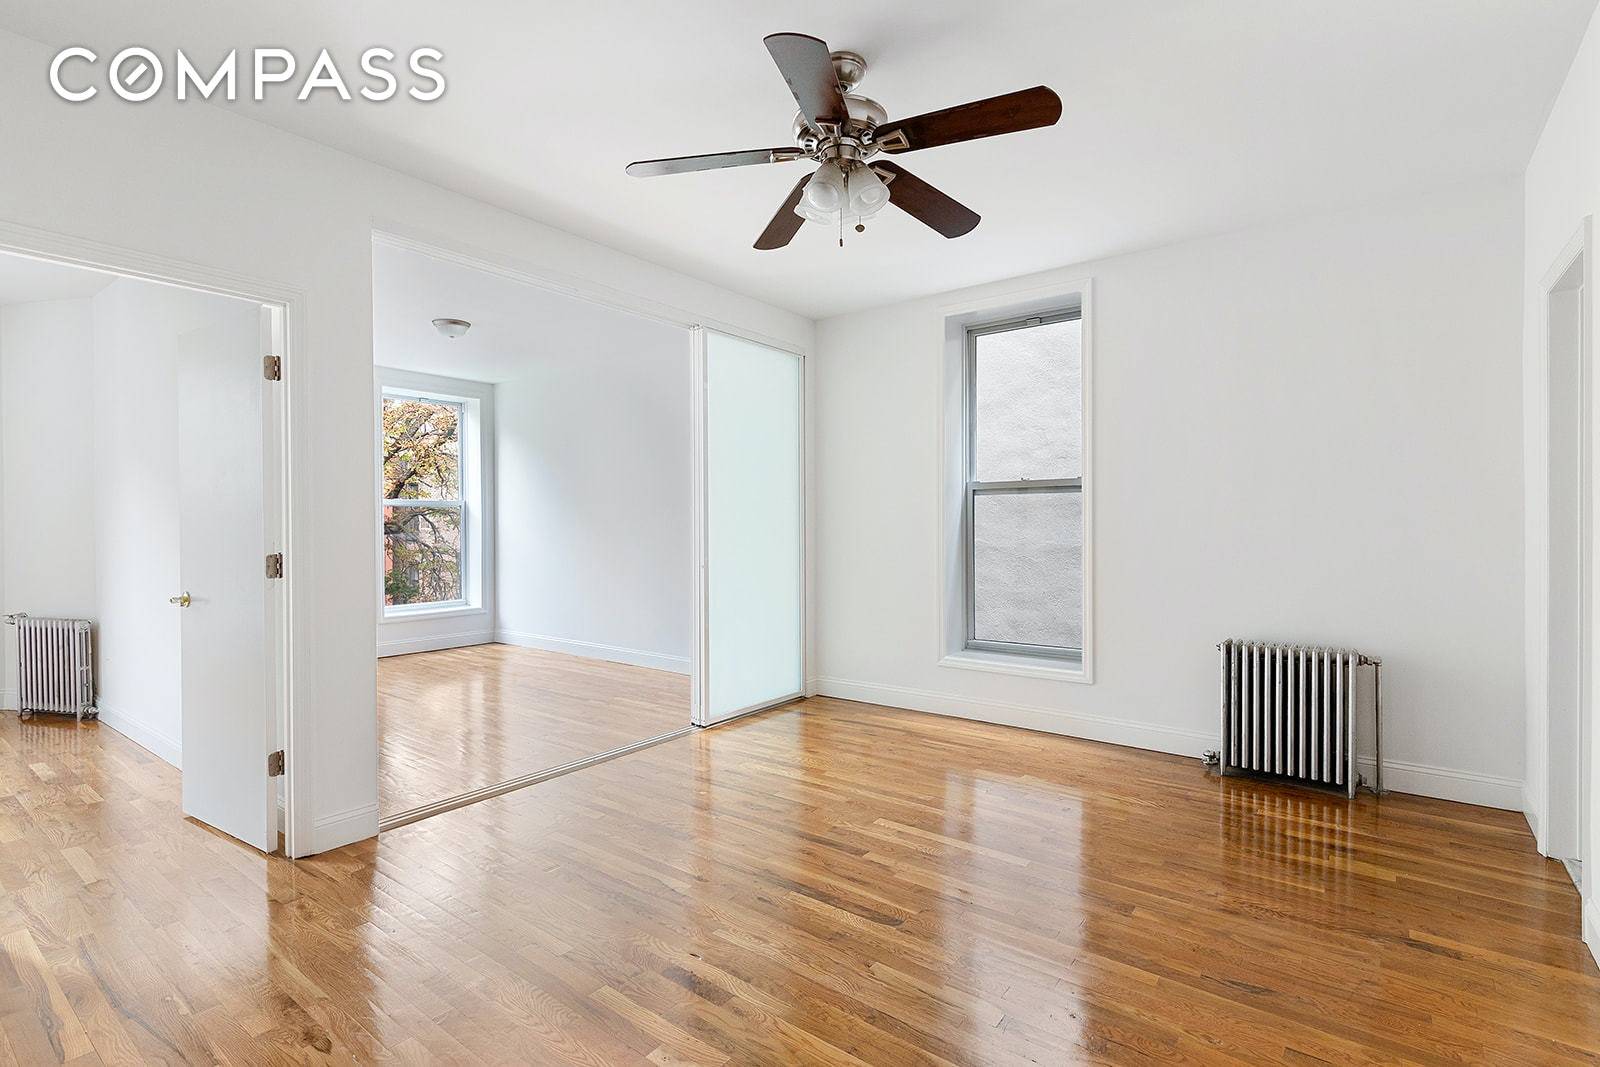 Live in Clinton Hill in a beautiful 2 BR 1 BA in a well maintained walk up building located around the corner from the Classon G train, Peaches, Clementine, Speedy ...